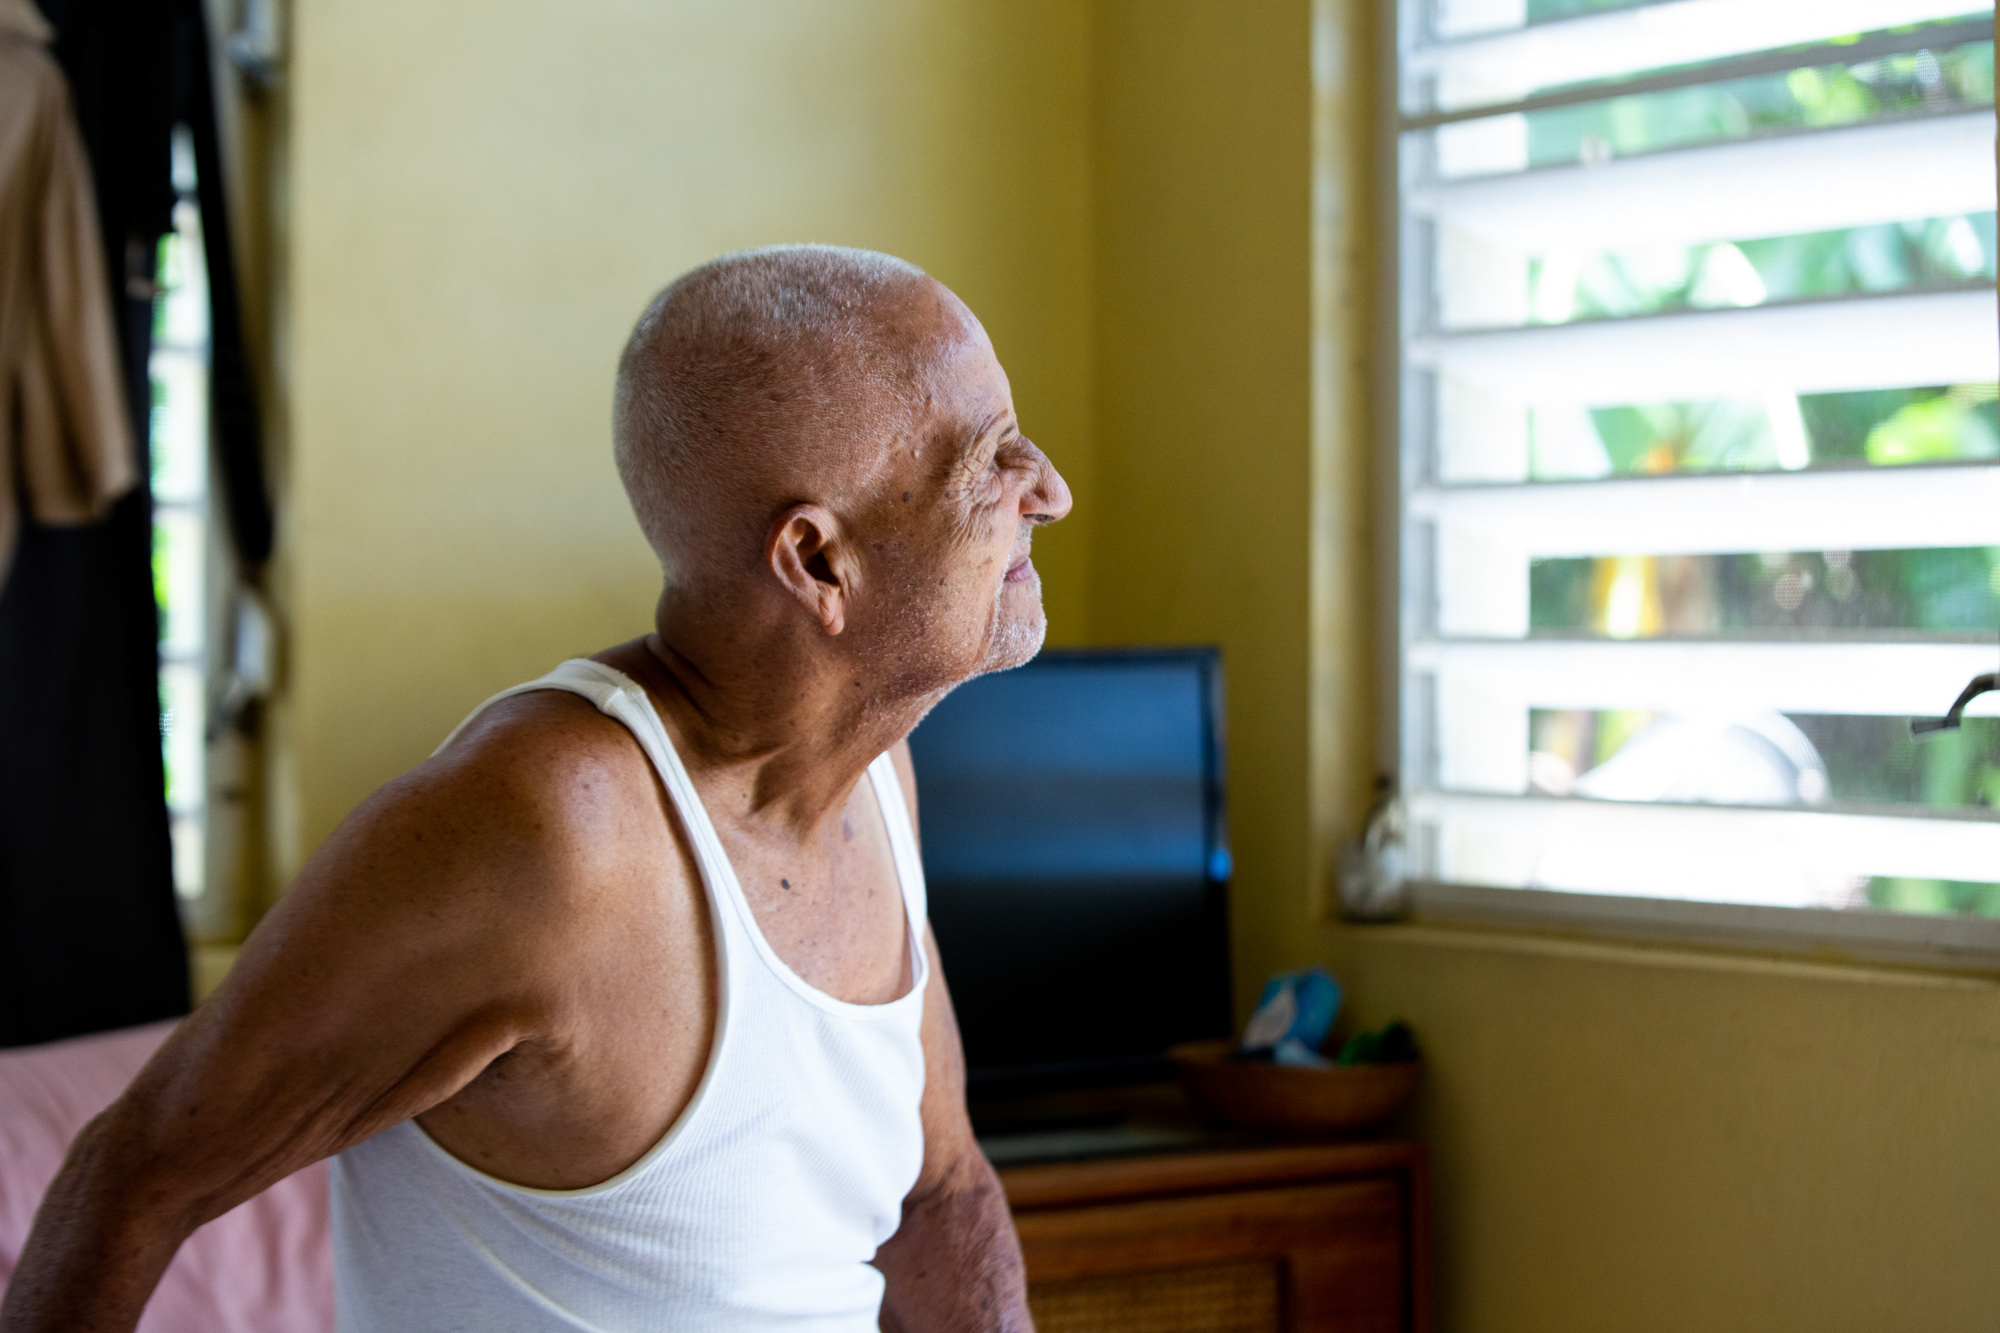 Guillermo Huertas - Guillermo Huertas, 90, has dementia and is living with his wife and daughter in Frederiksted, U.S. Virgin Islands. Although much of their house sustained heavy damage almost two years ago, the family is reluctant to move. (Anya Magnuson/News21)